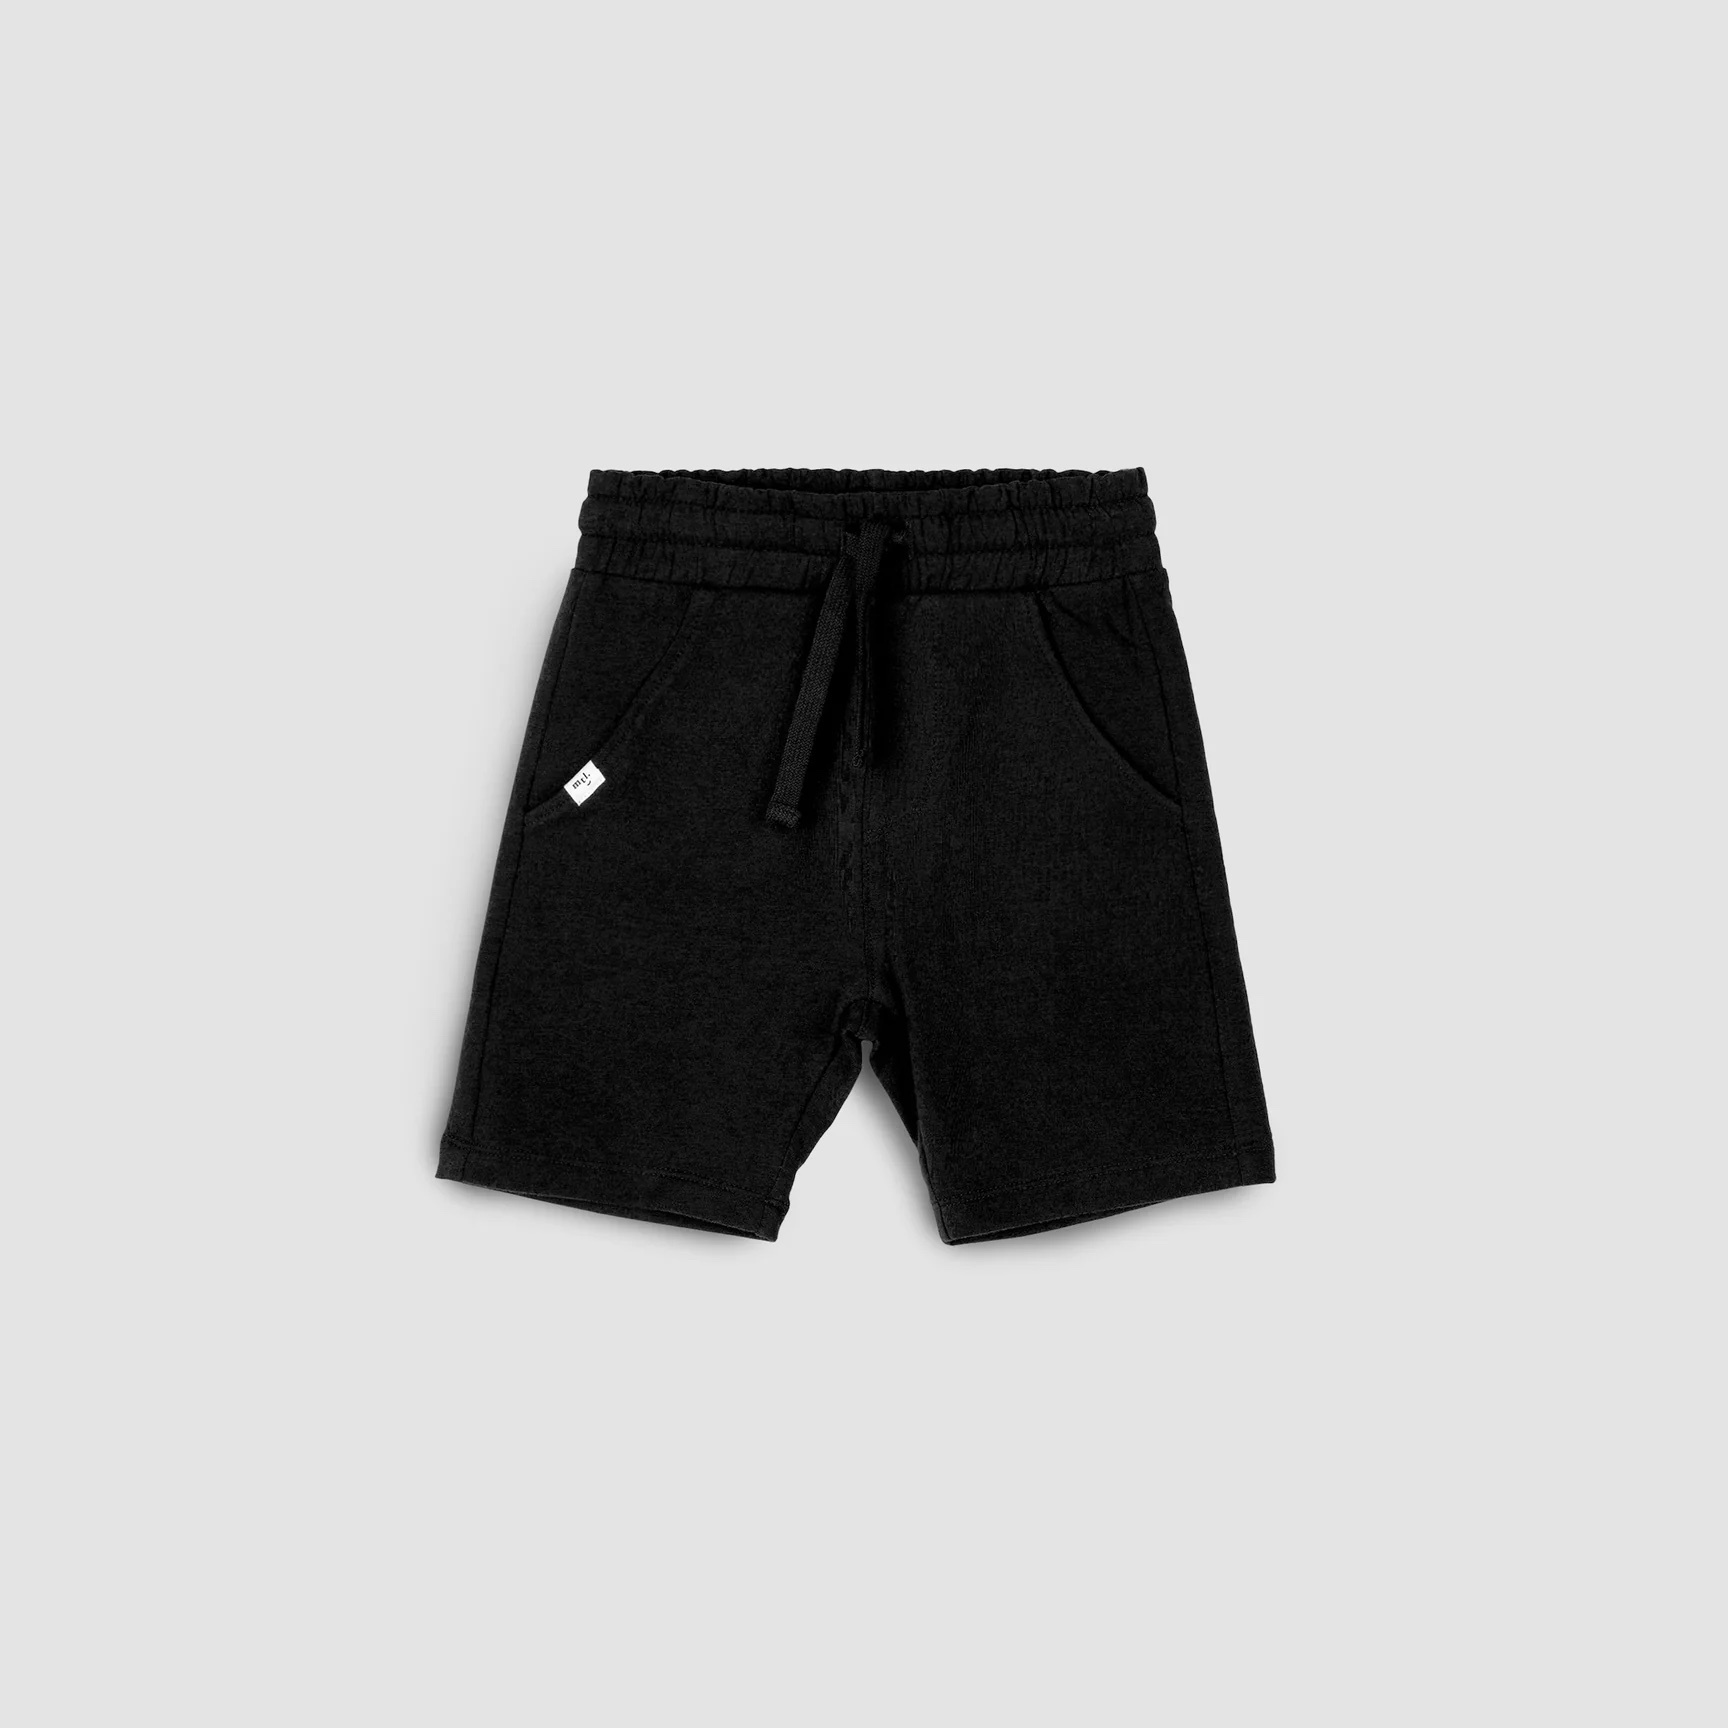 Miles the Label Miles Basic Infant Terry Shorts